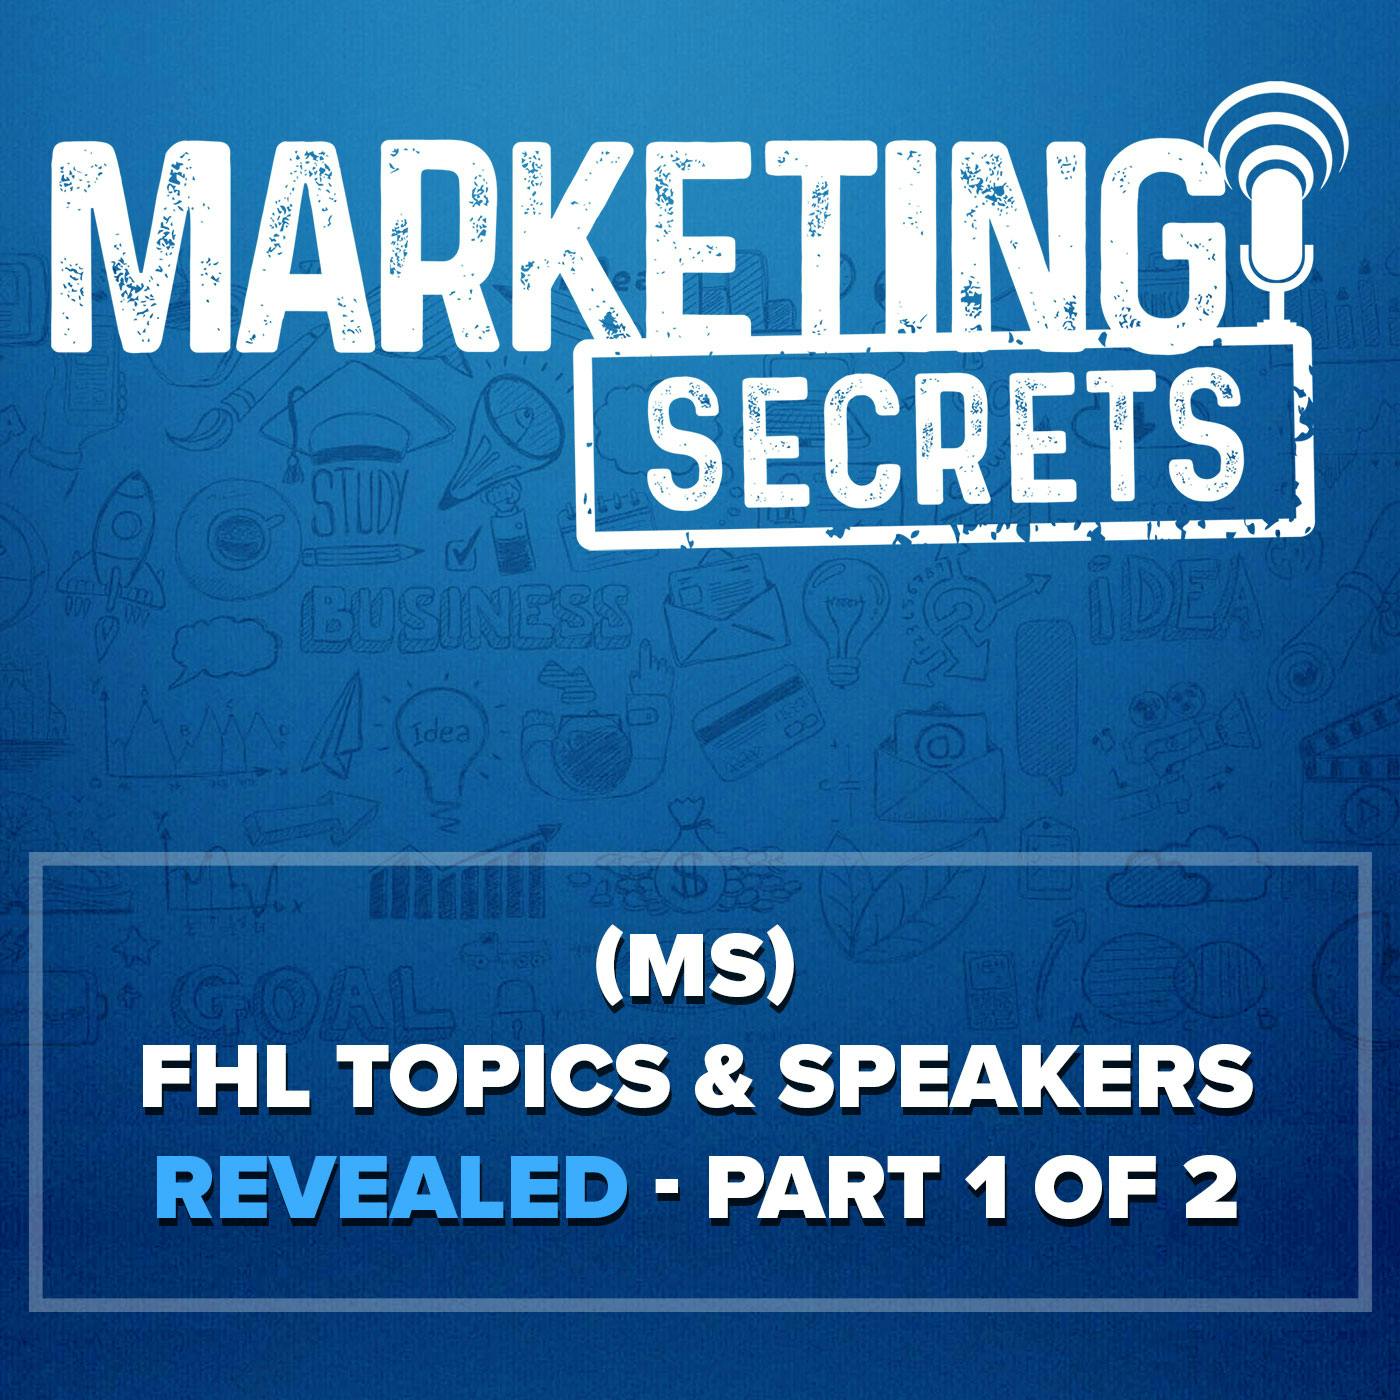 (MS) FHL Topics & Speakers REVEALED - Part 1 of 2 by Russell Brunson